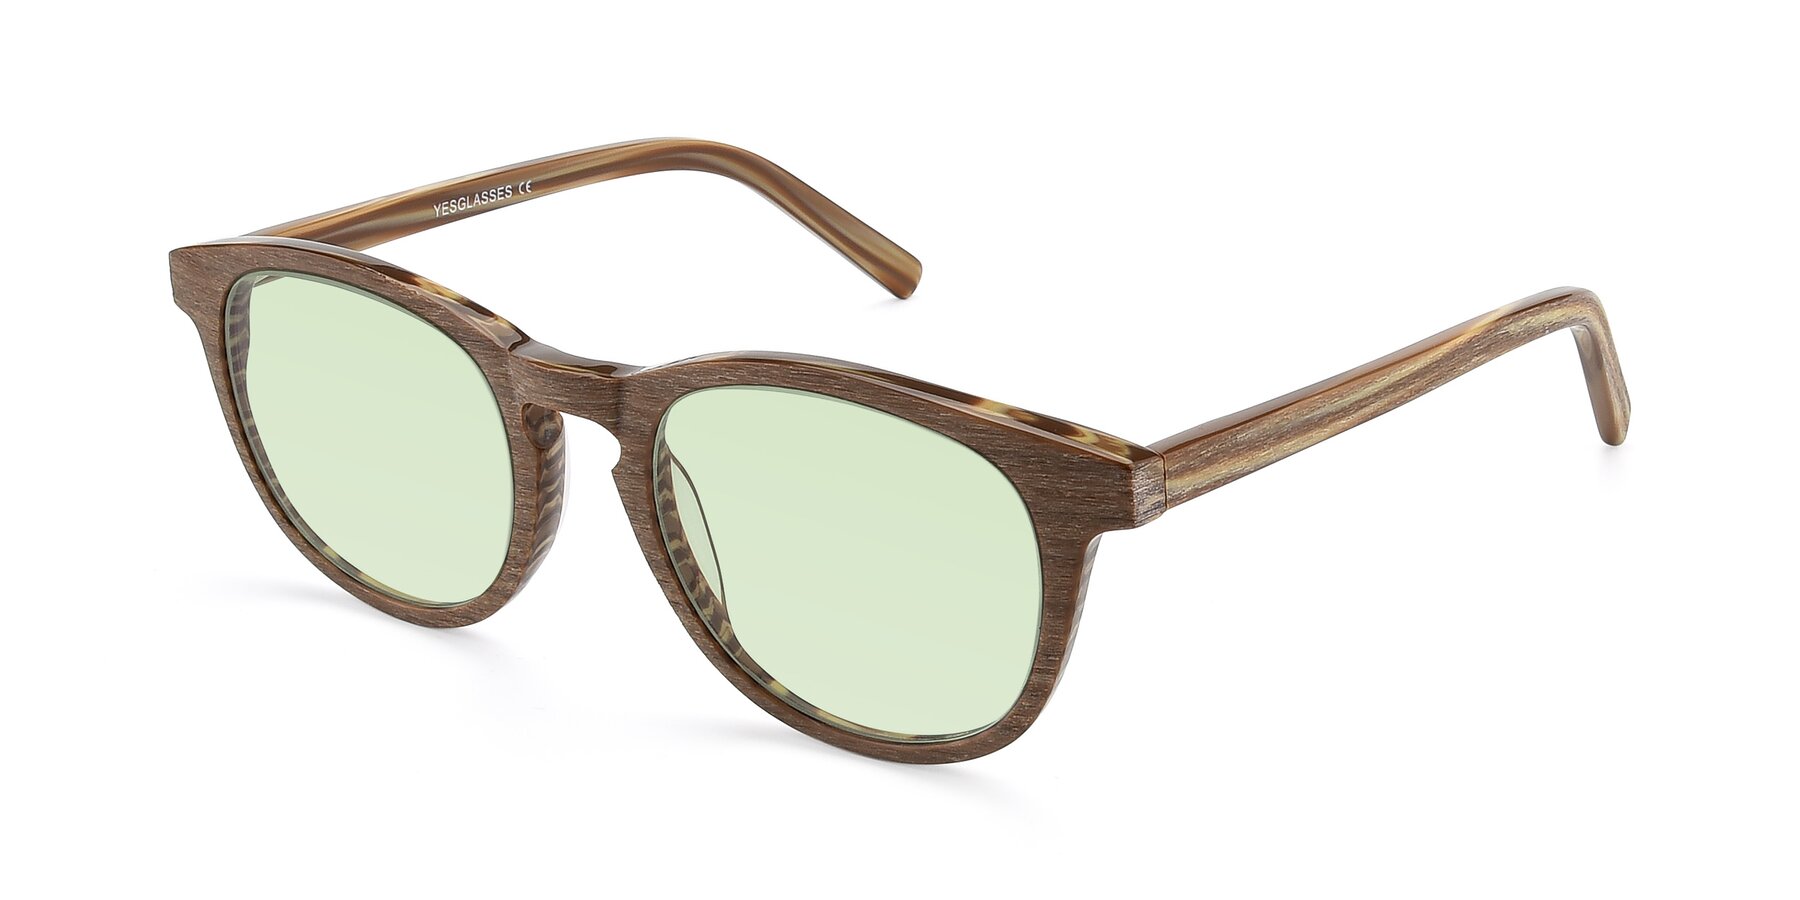 Angle of SR6044 in Brown-Wooden with Light Green Tinted Lenses